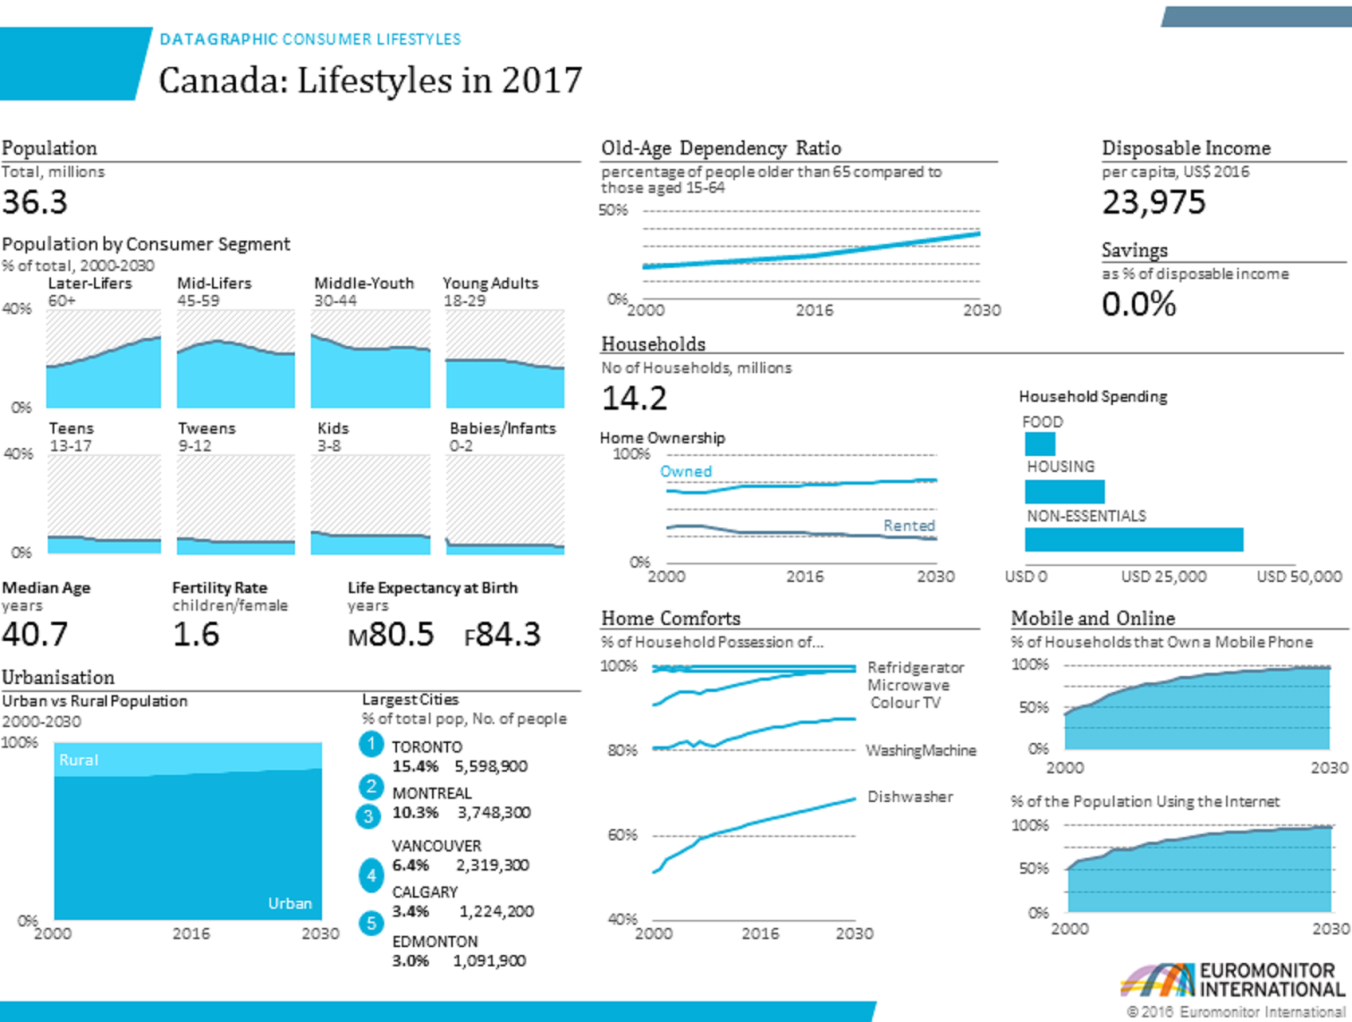 consumer lifestyles in canada in 2017. total population, old-age dependency ratio, disposable income, savings, population by consumer segment, households, household spending, home ownership, median population age, fertility rate, life expectancy at birth, home comforts, mobile and online penetration rates, urbanization, largest cities.